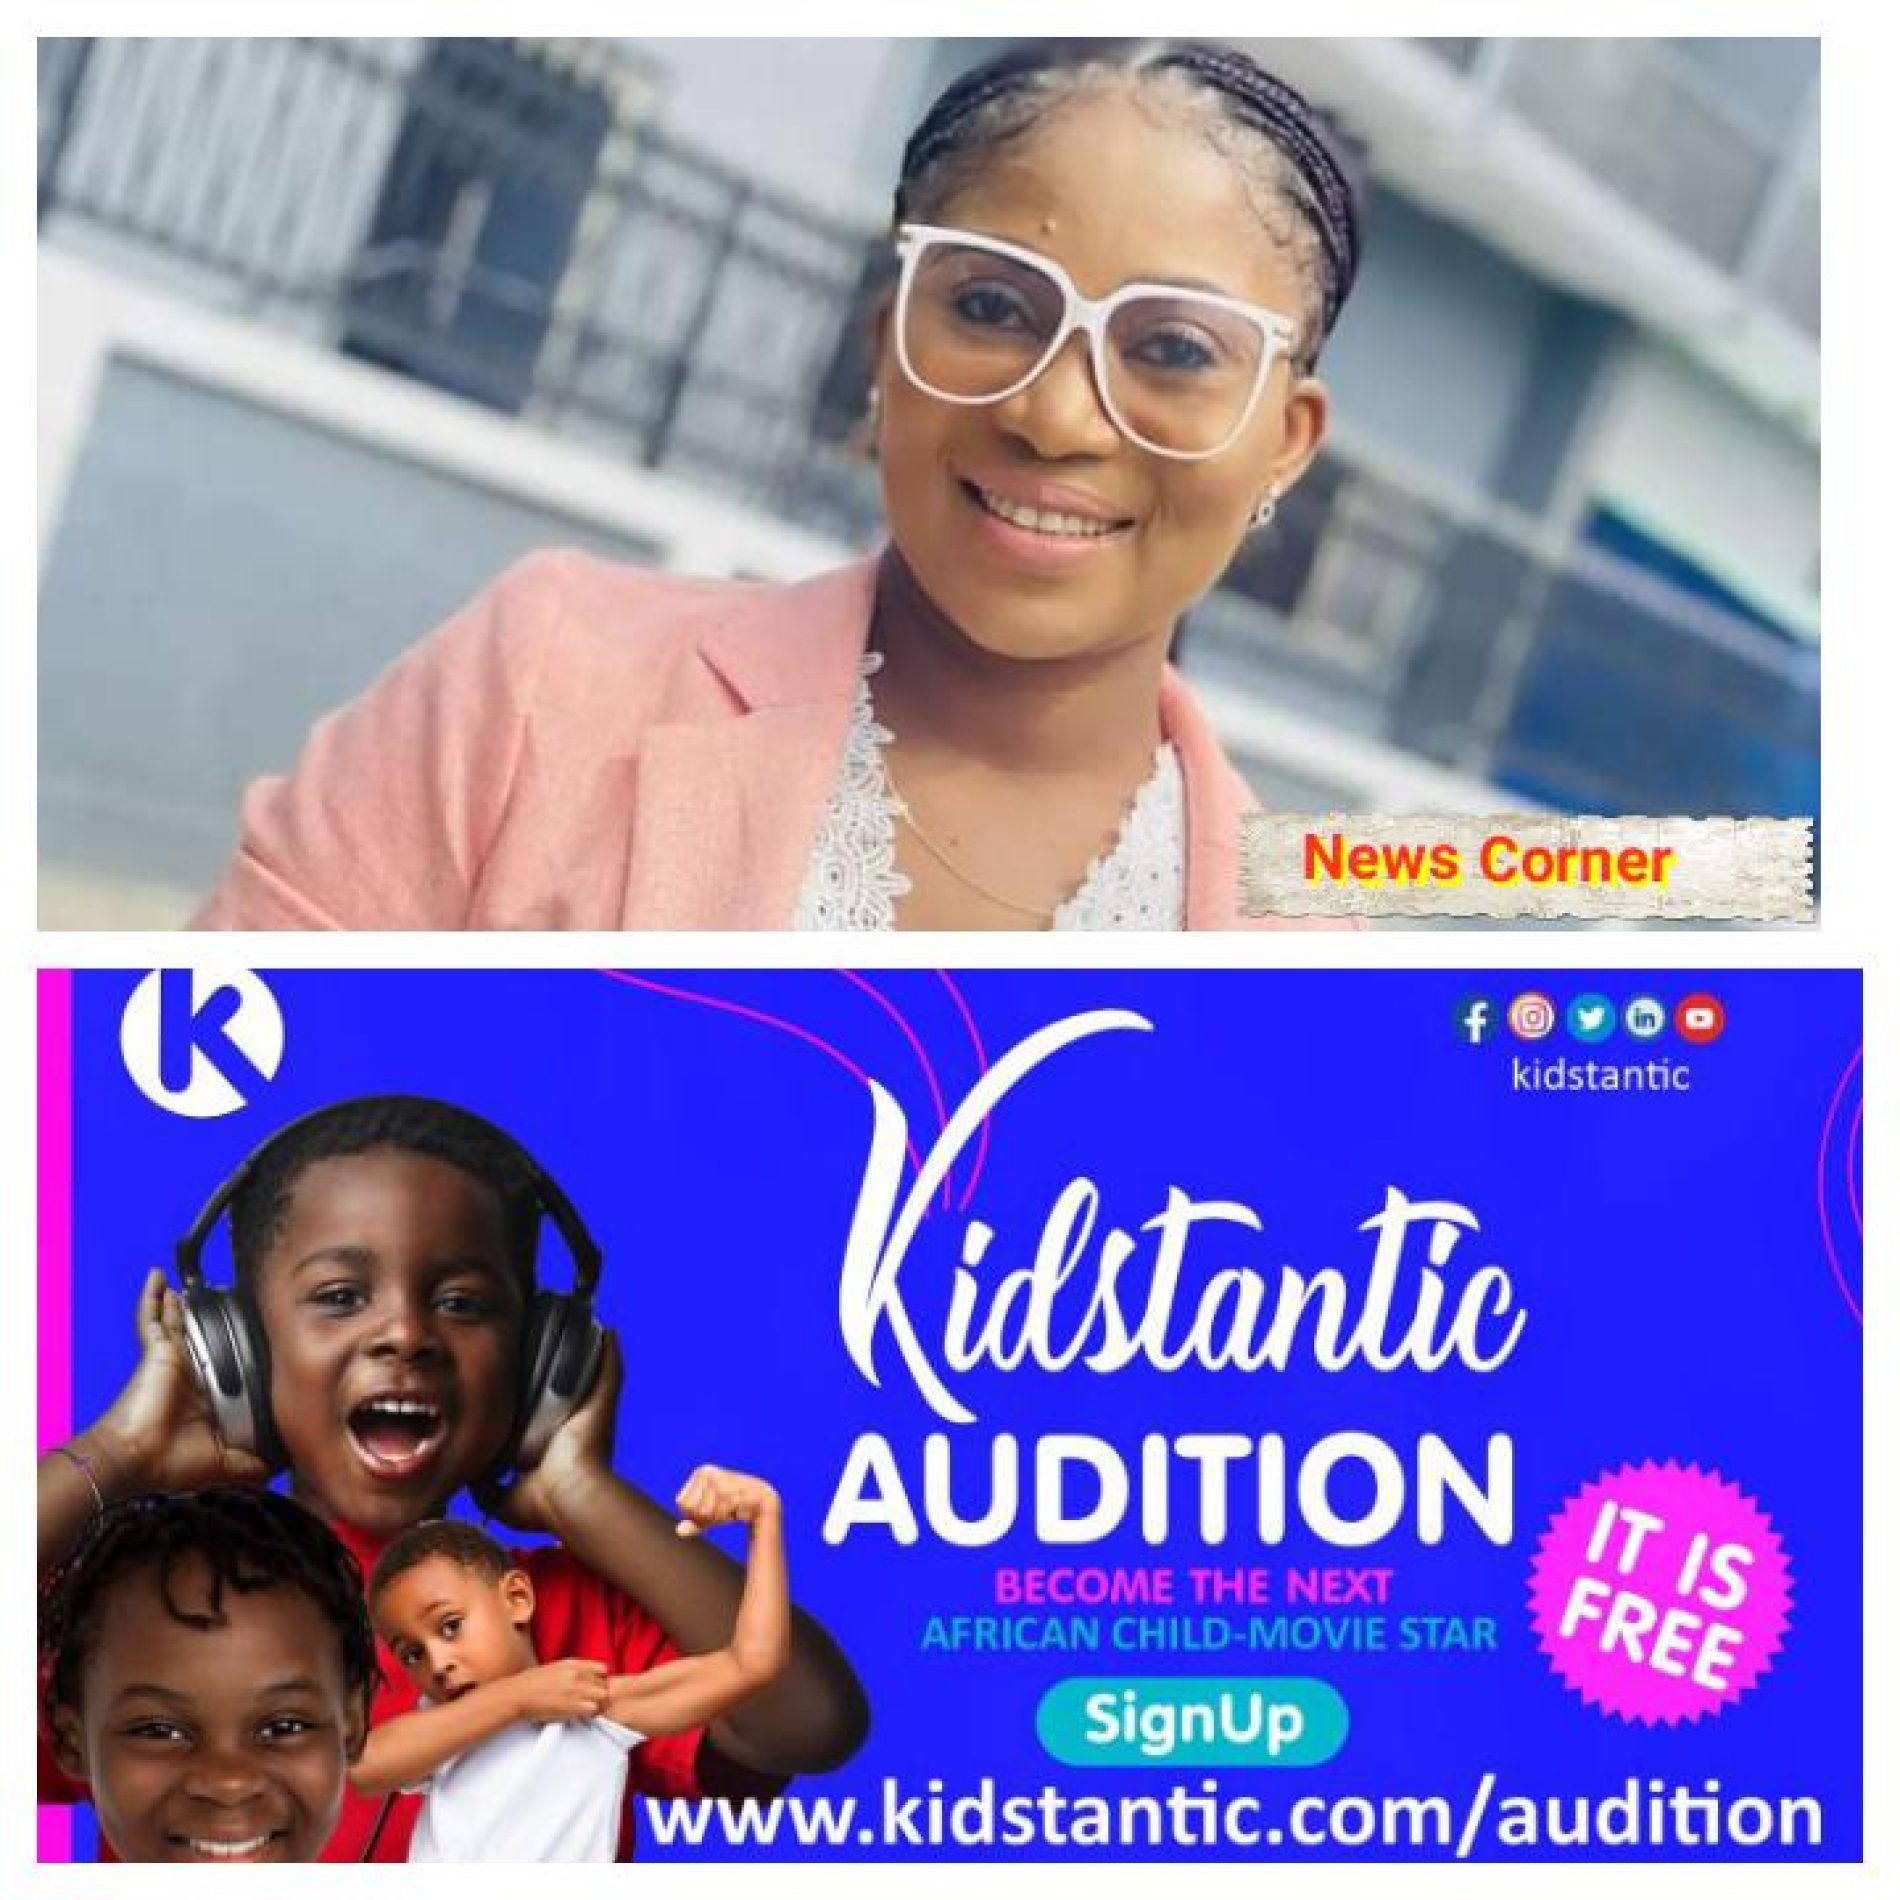 Barr. Anulika Okoro Speaks on Kidstantic Vision, Working with Children, Audition.